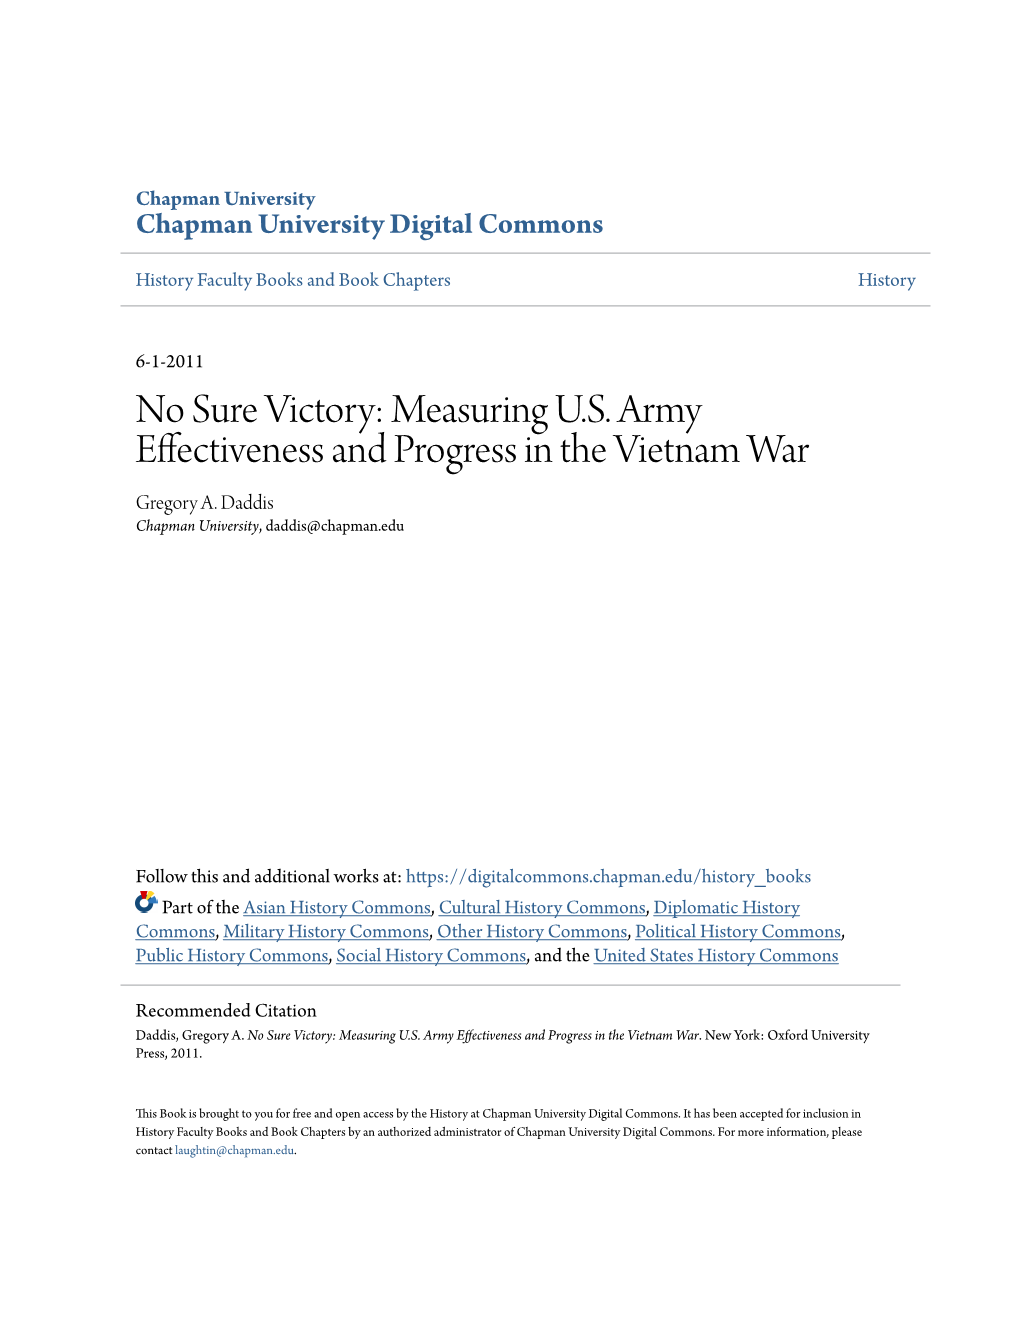 Measuring US Army Effectiveness and Progress in the Vietnam